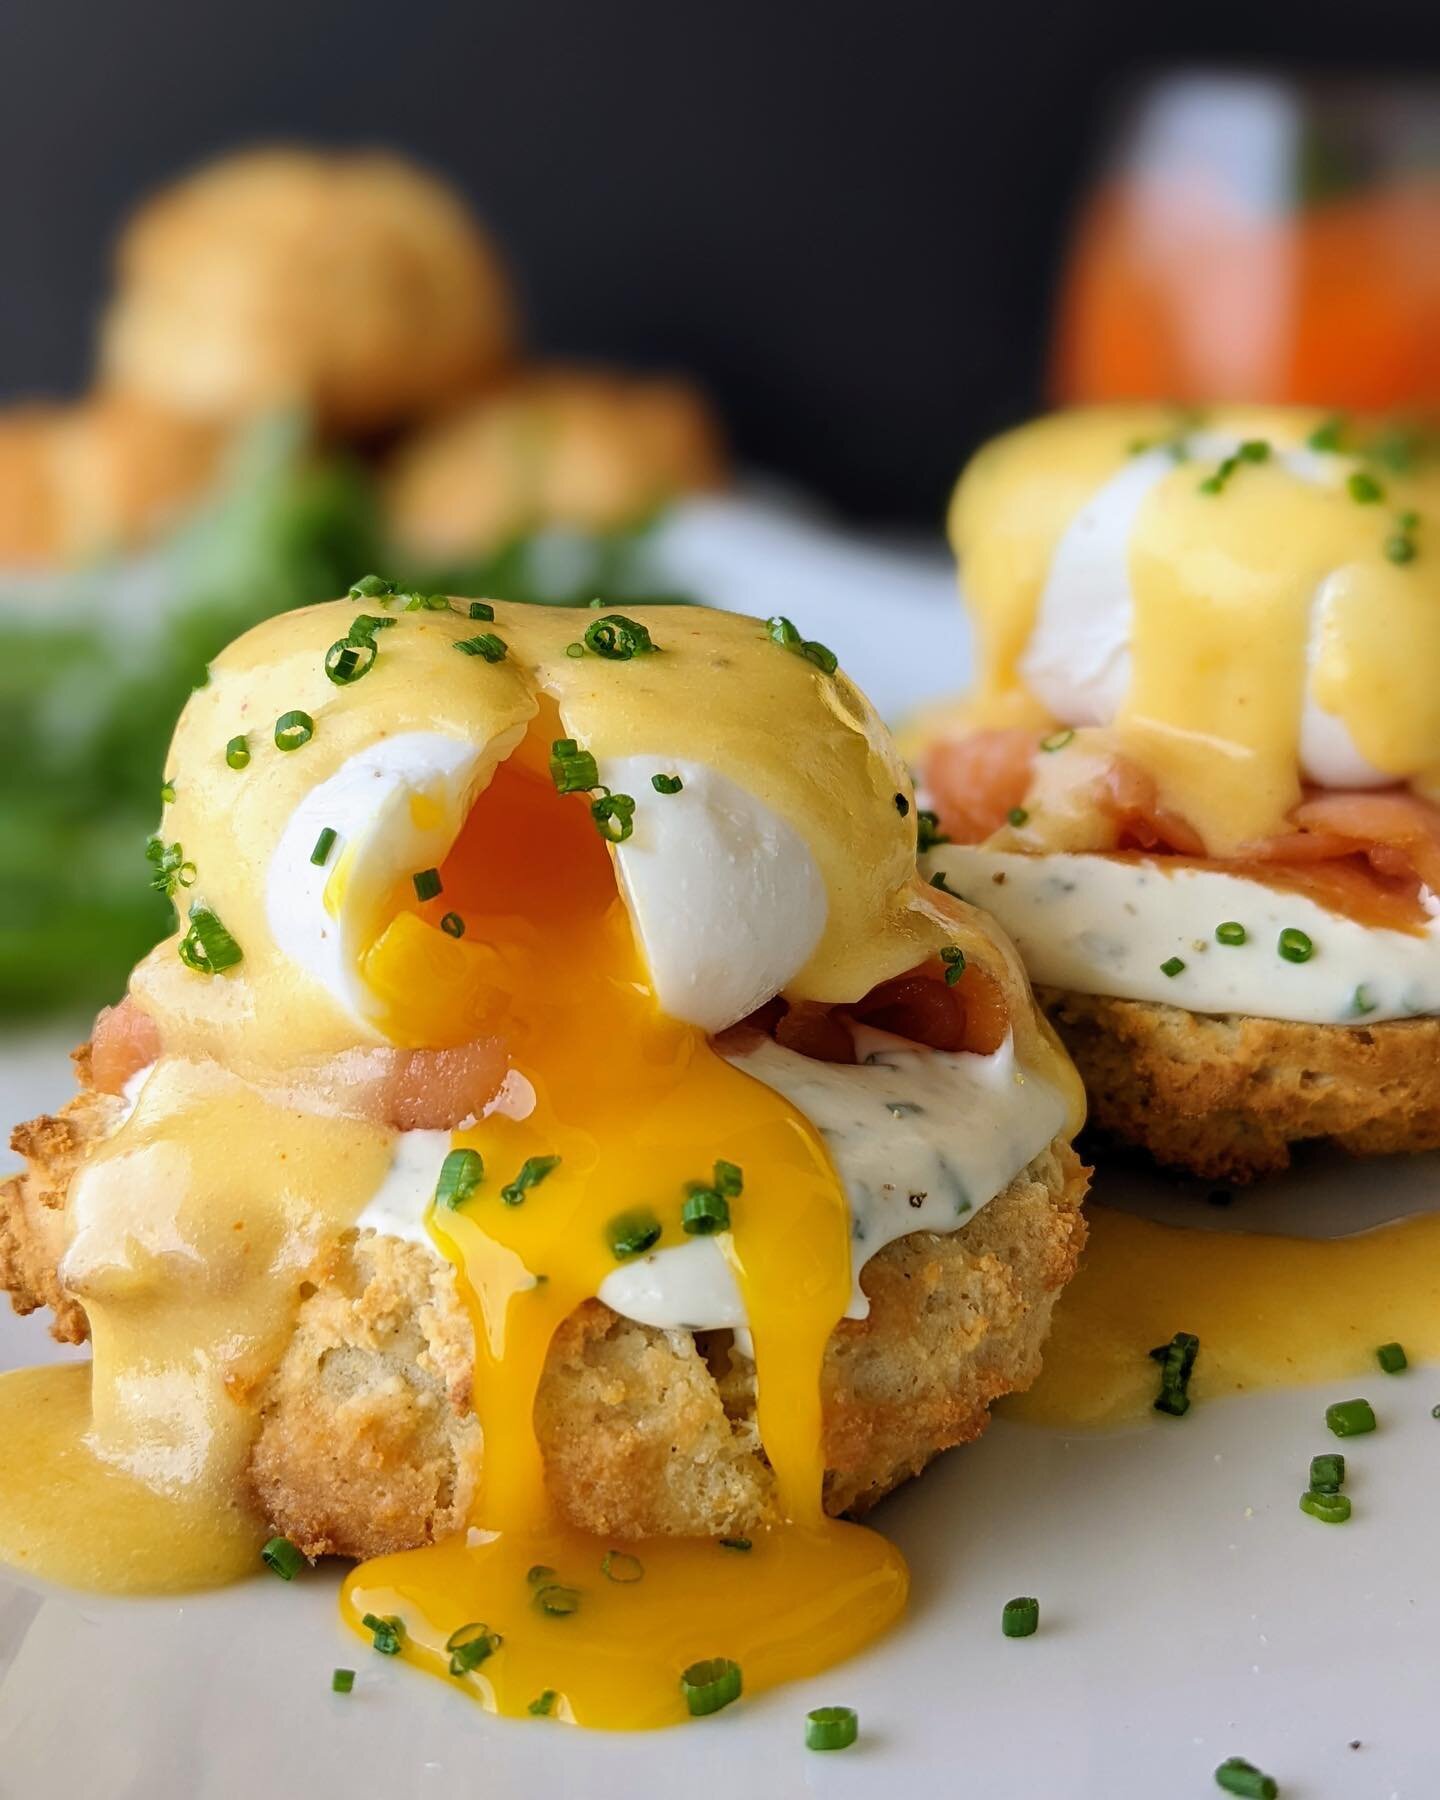 It&rsquo;s the weekend and you deserve to treat-ya-self to #brunch! Stop by to try our mouth-watering Smoked Salmon Benedict - it&rsquo;s full of flavor and made with only the best ingredients.

Link in bio to reserve your table at our South 1st or B